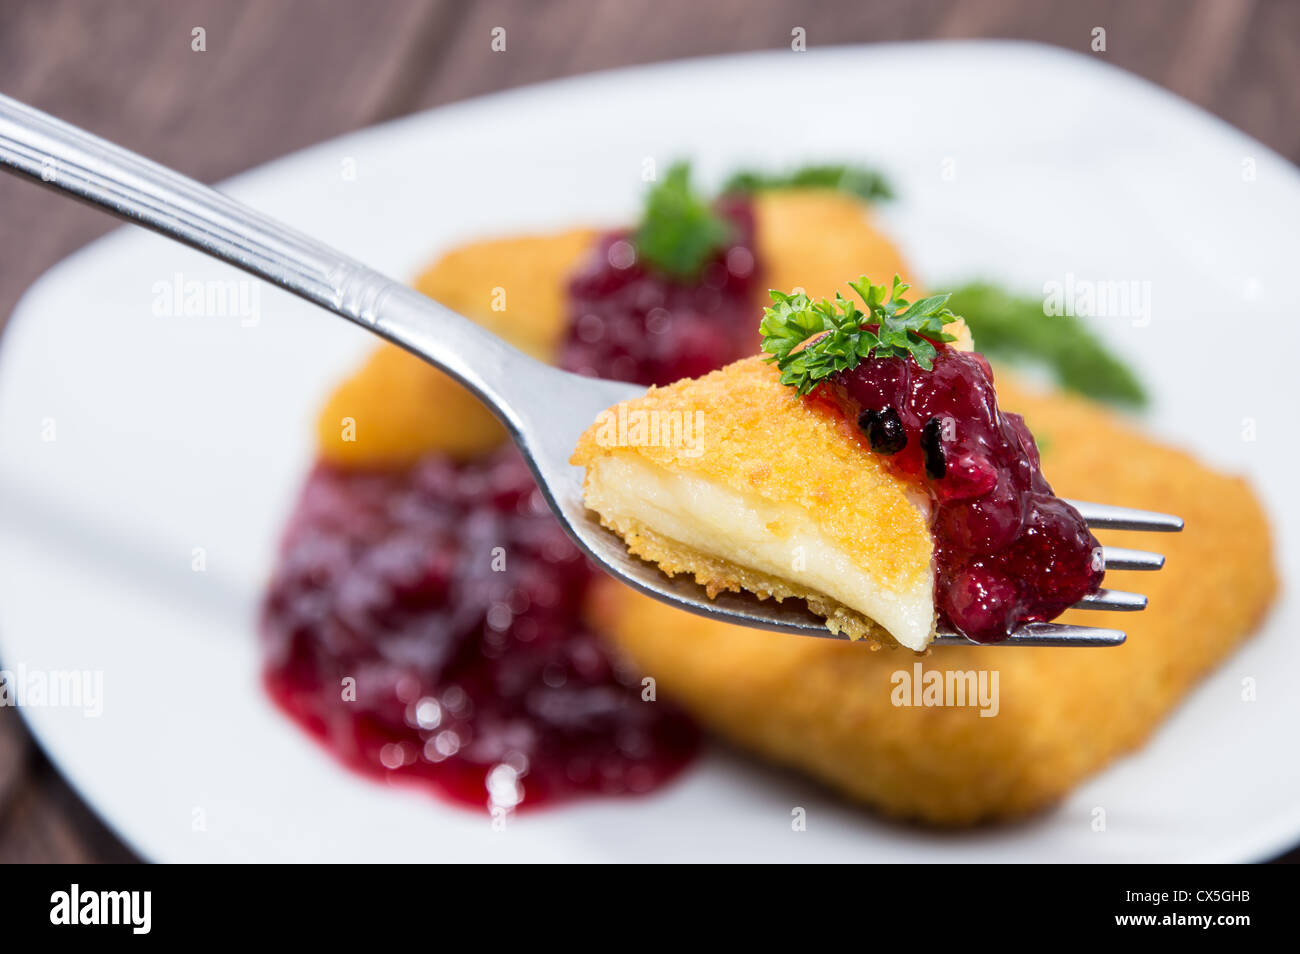 Fried Gouda on a fork on wooden background Stock Photo